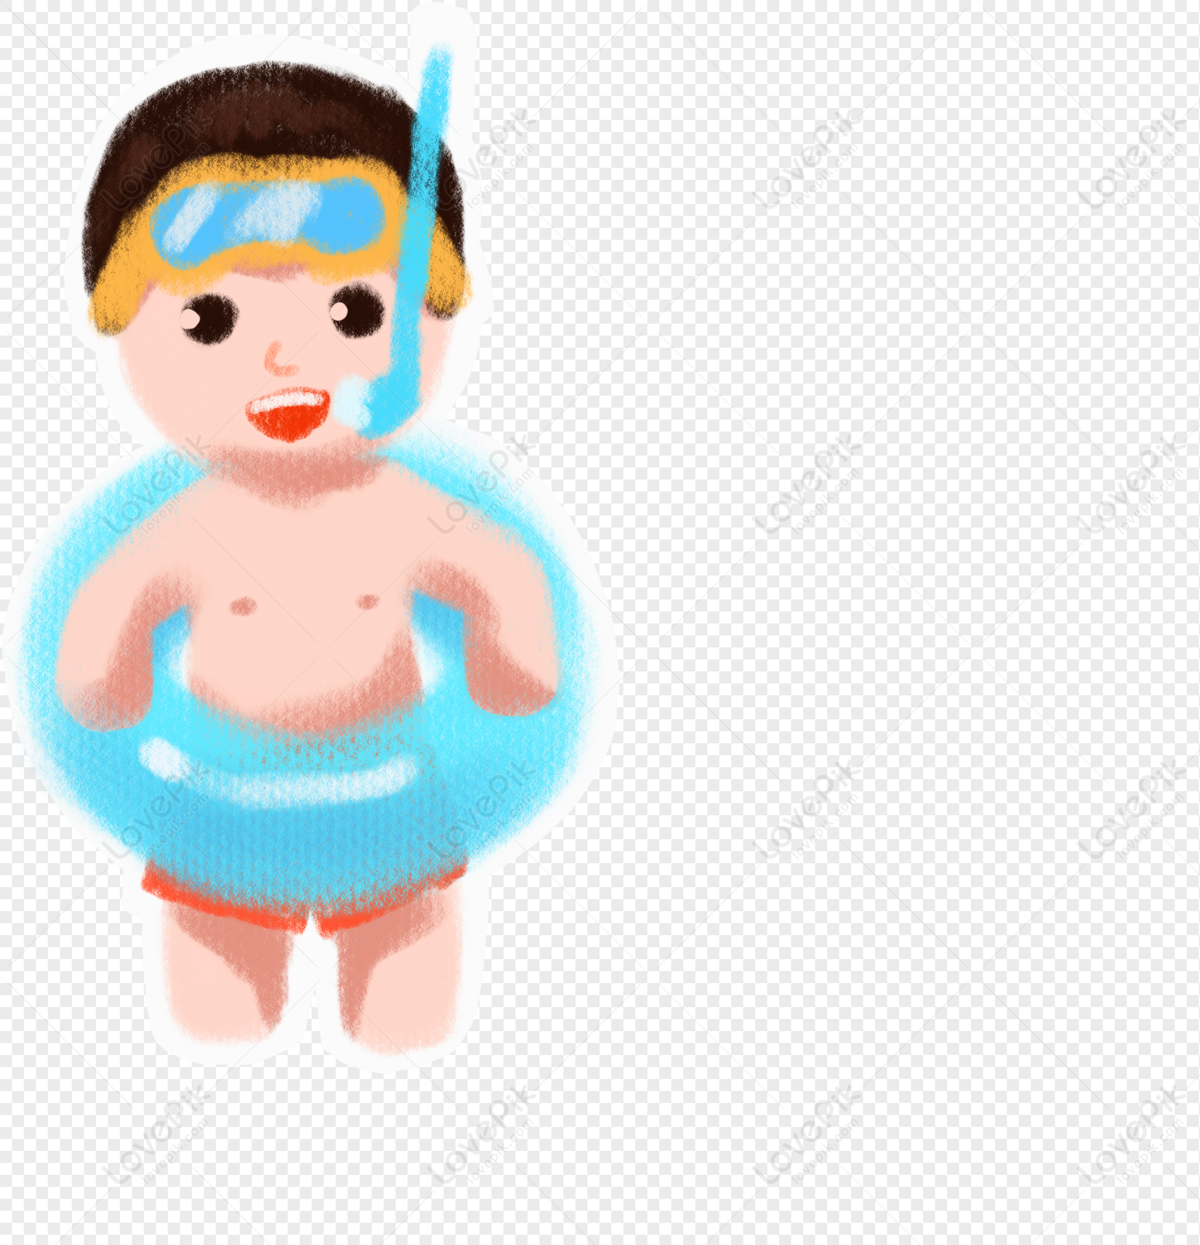 Swimsuit PNG Image Free Download And Clipart Image For Free Download ...